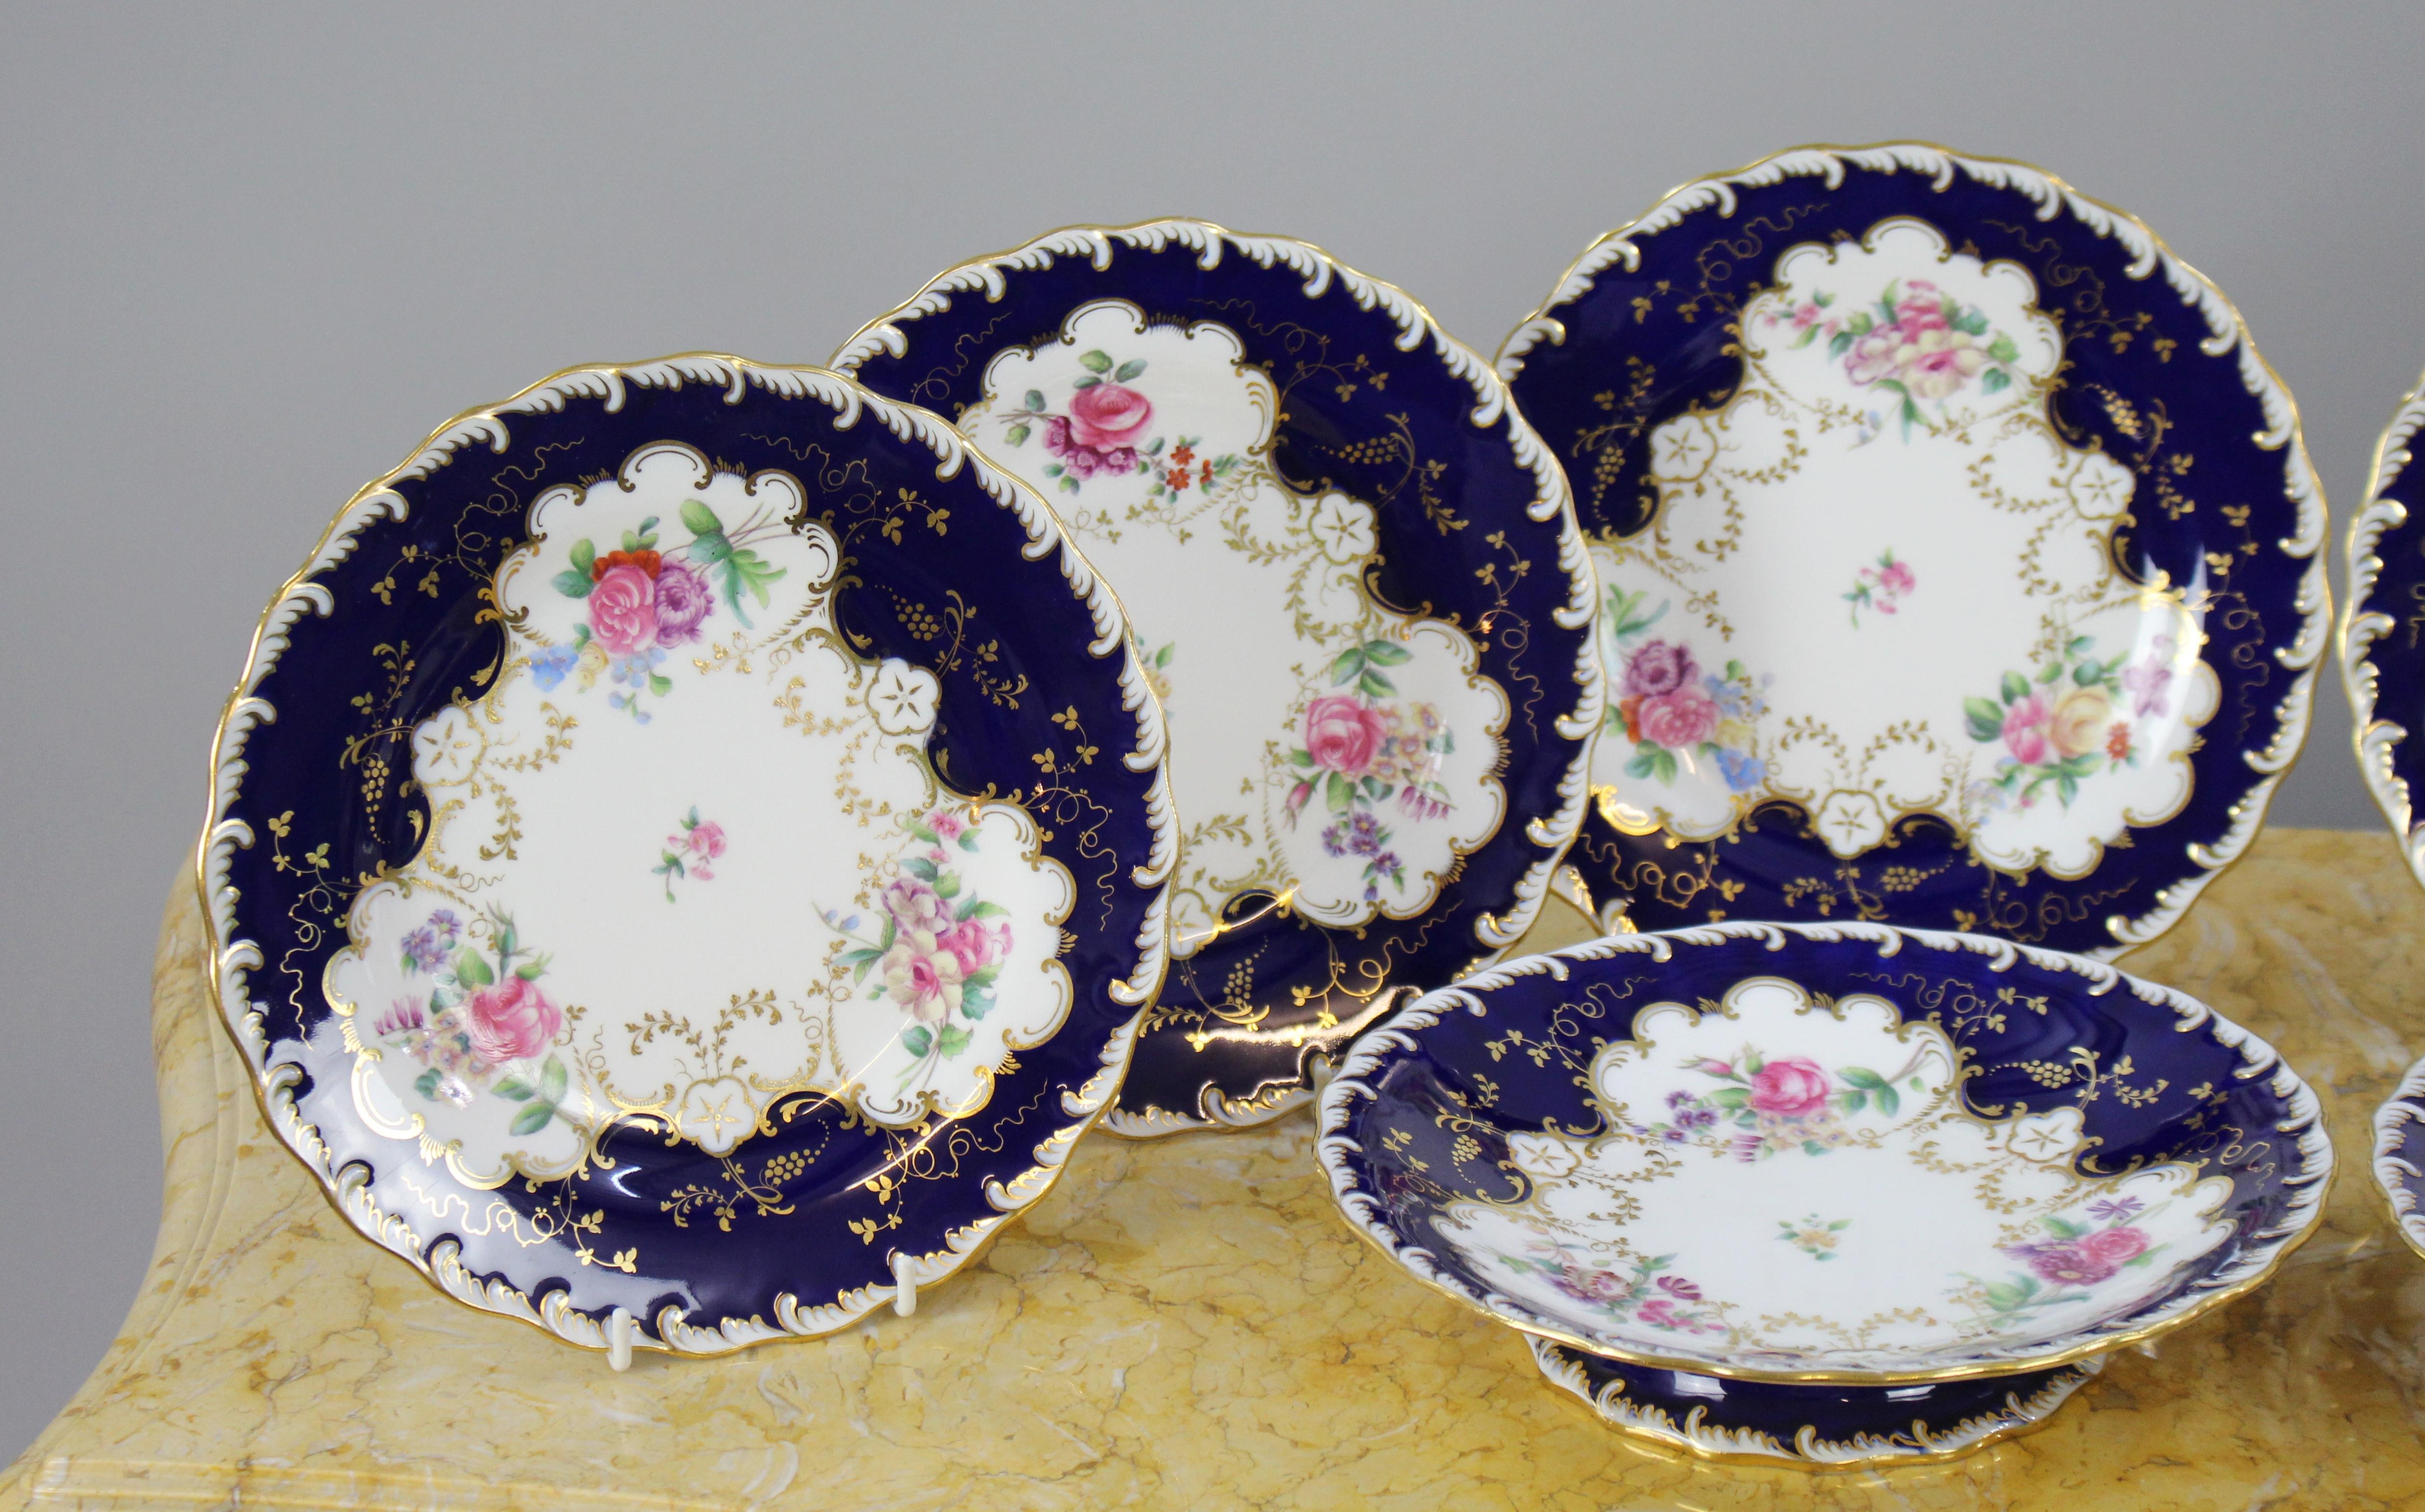 Manufacturer 
Minton

Decoration 
White & cobalt blue with floral decoration and gilding

Period 
c.1900

Pieces 
8 piece; 6 x 9 inche plates & 2 x 9 inch footed comports

Backstamp 
All pieces with puce factory stamp. First